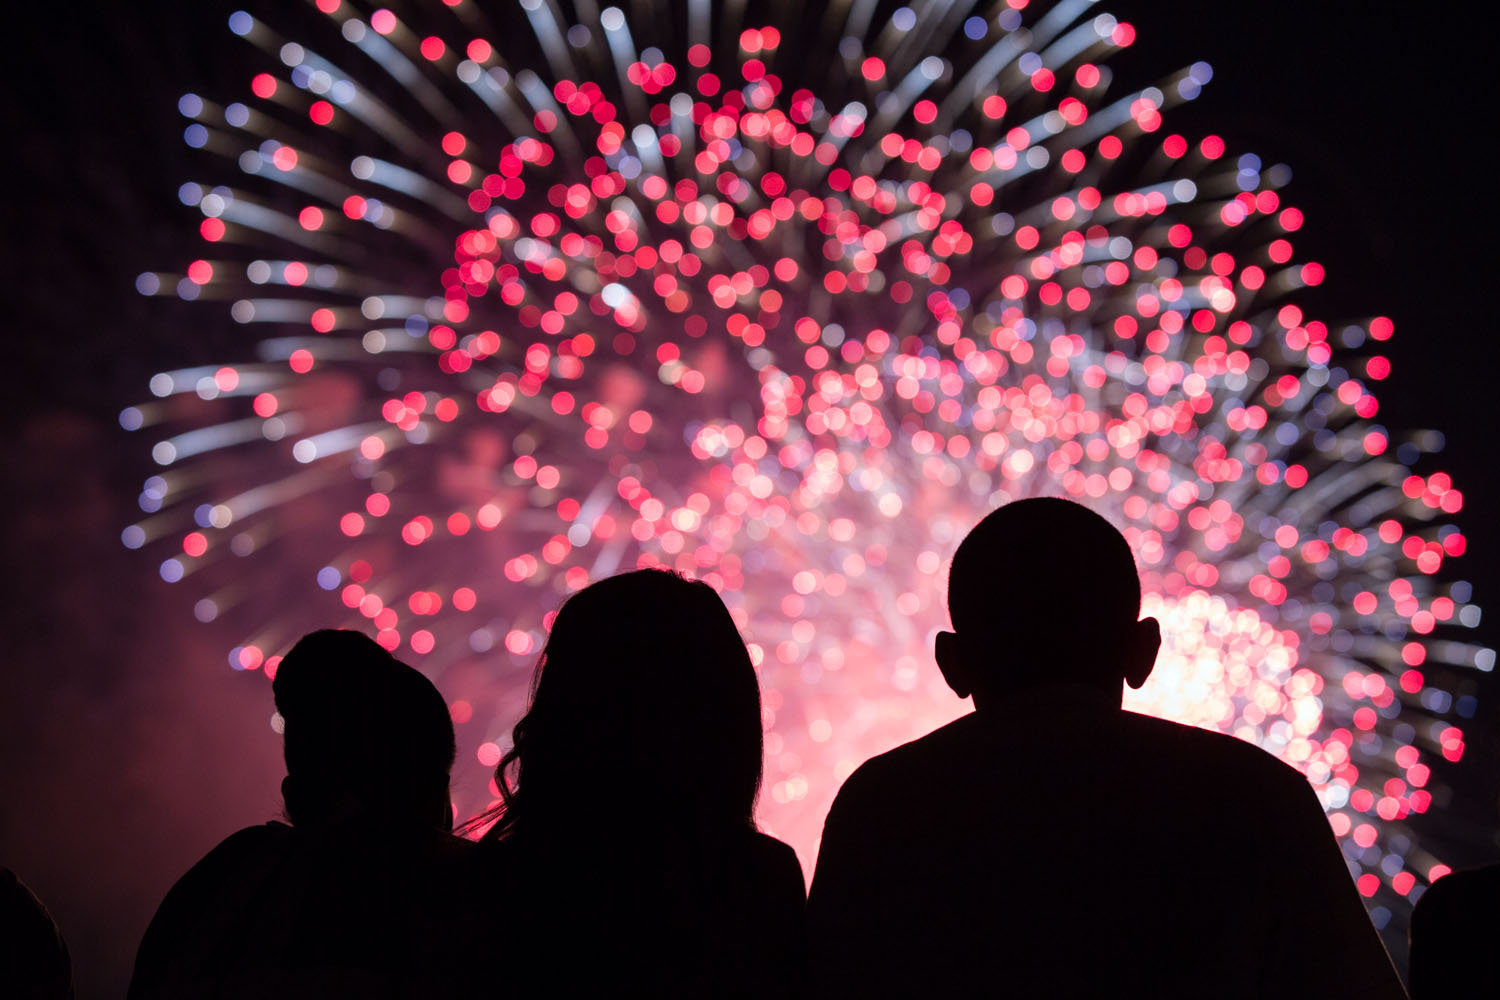 First Lady Michelle Obama, Malia Obama, and President Obama watch the Fourth of July fireworks